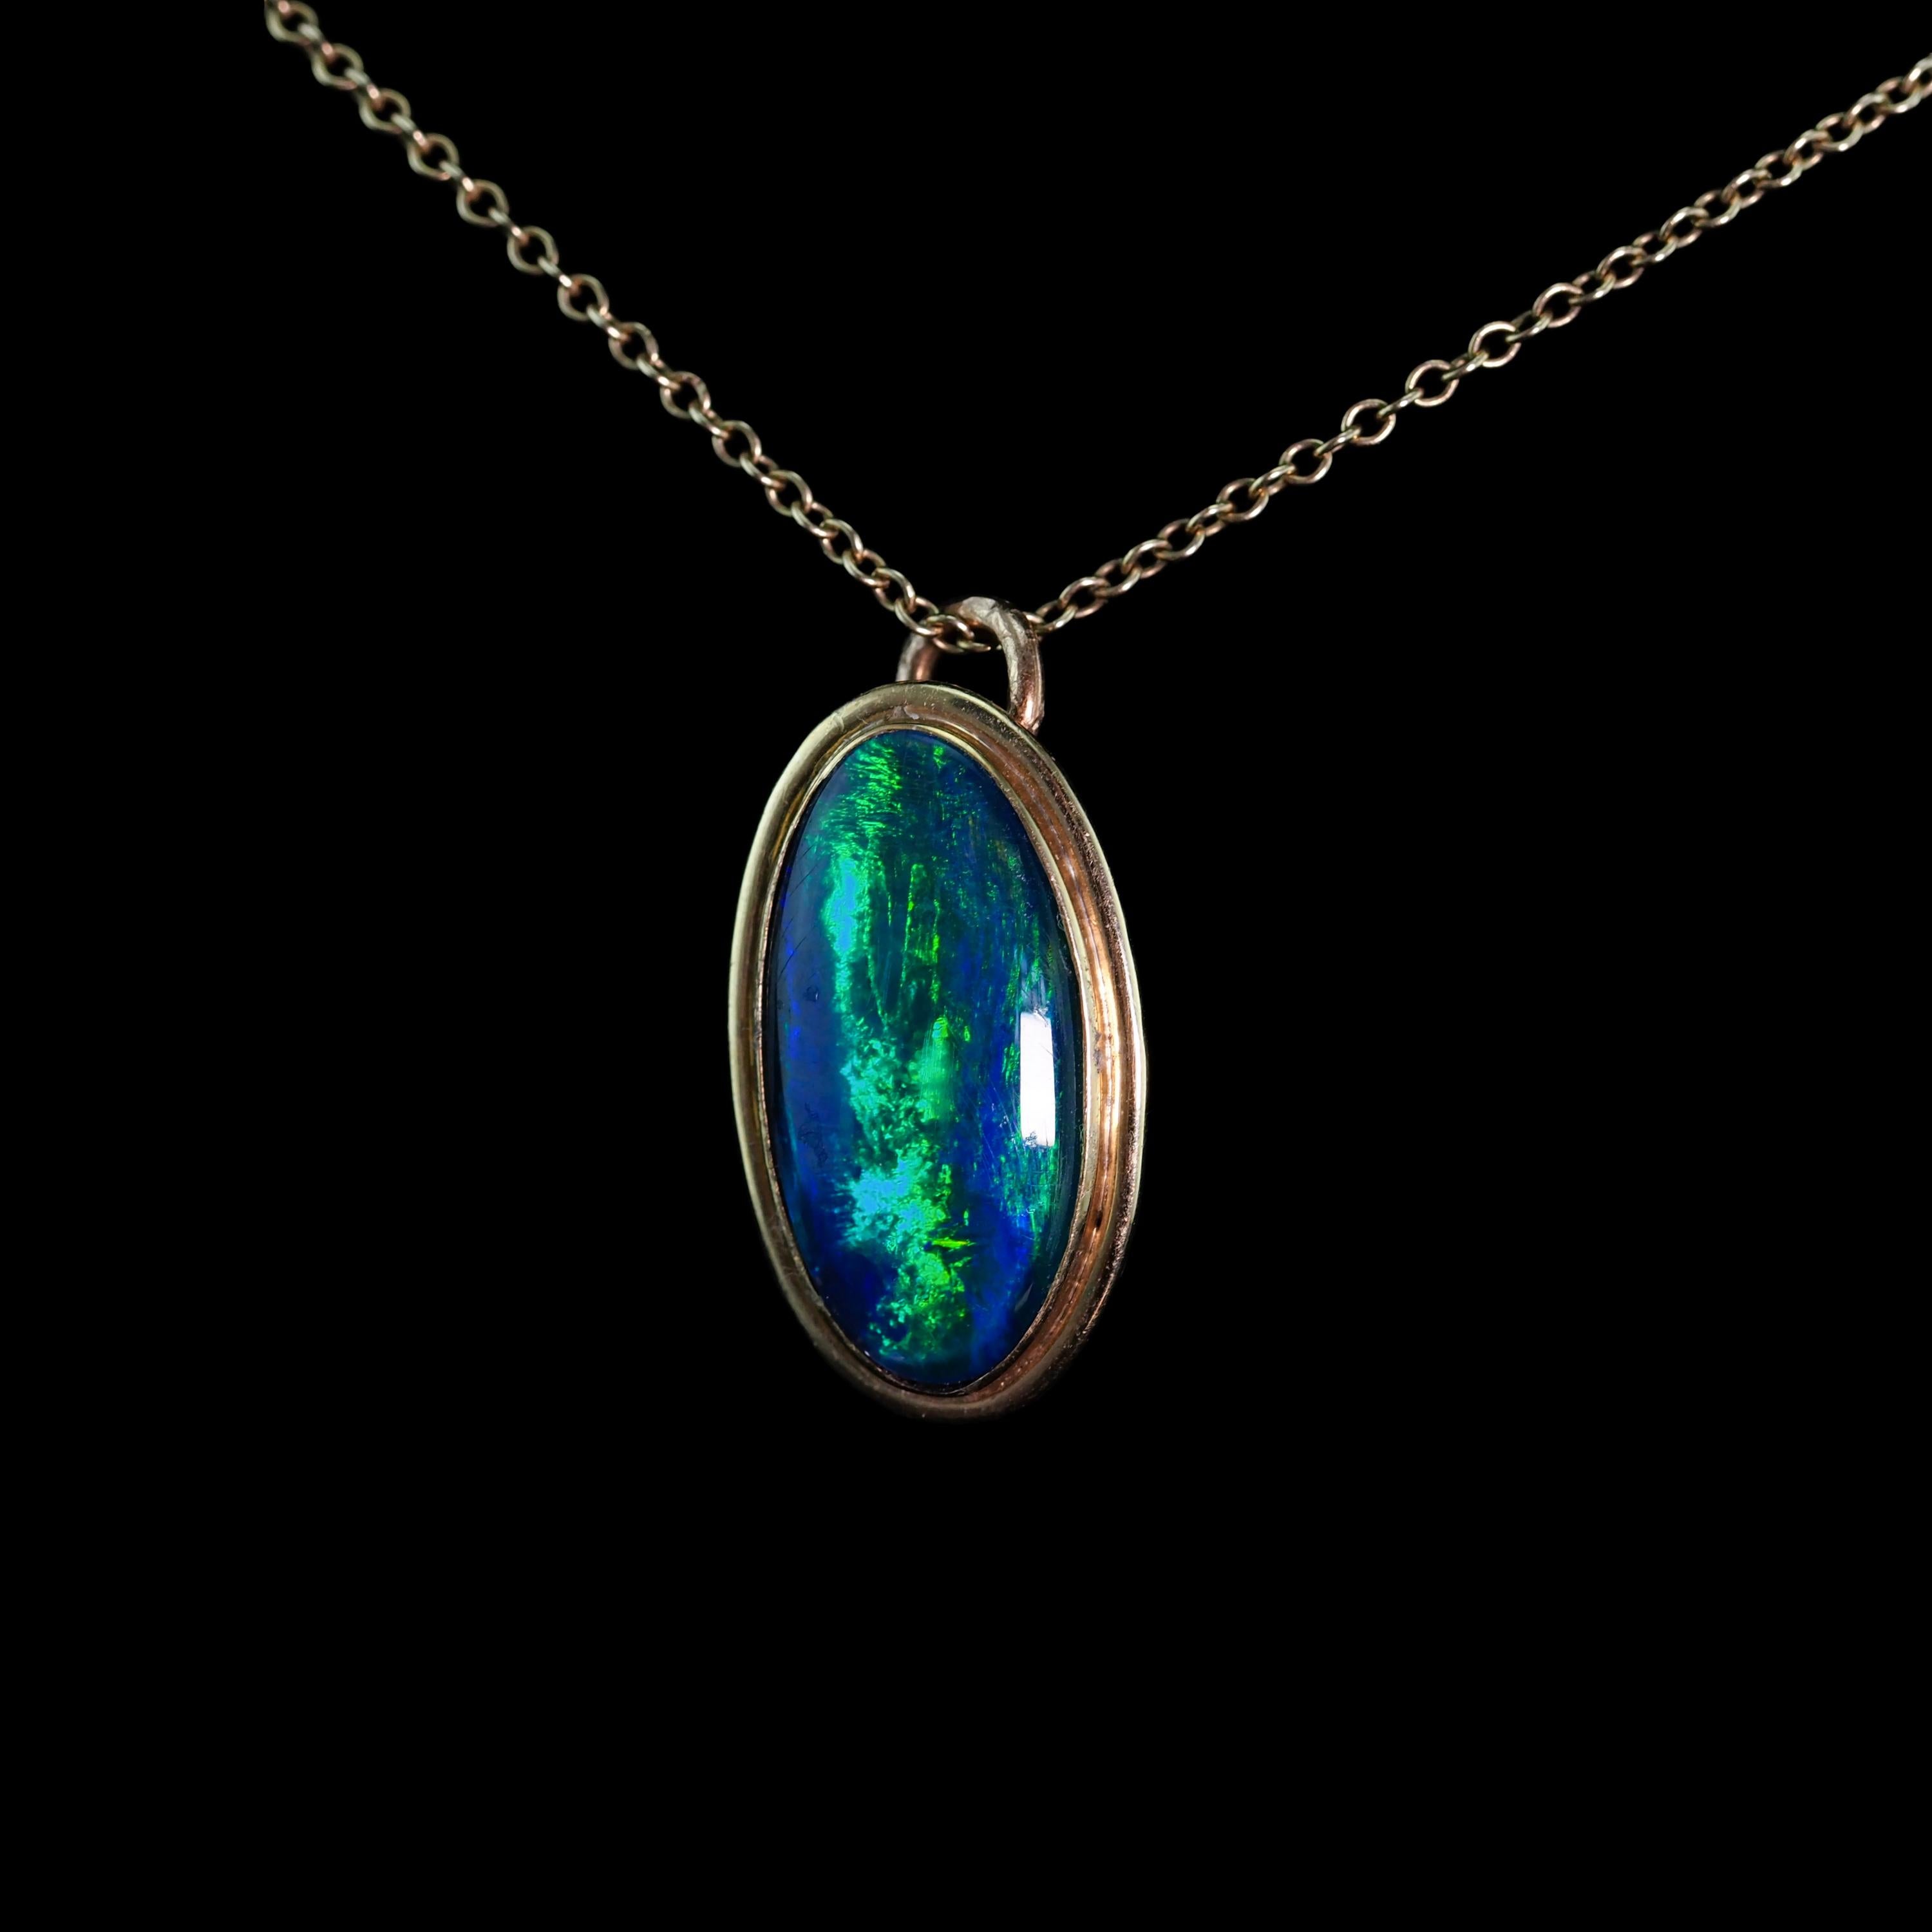 9K Gold Blue/Green Ammolite Pendant & Chain Necklace For Sale 2